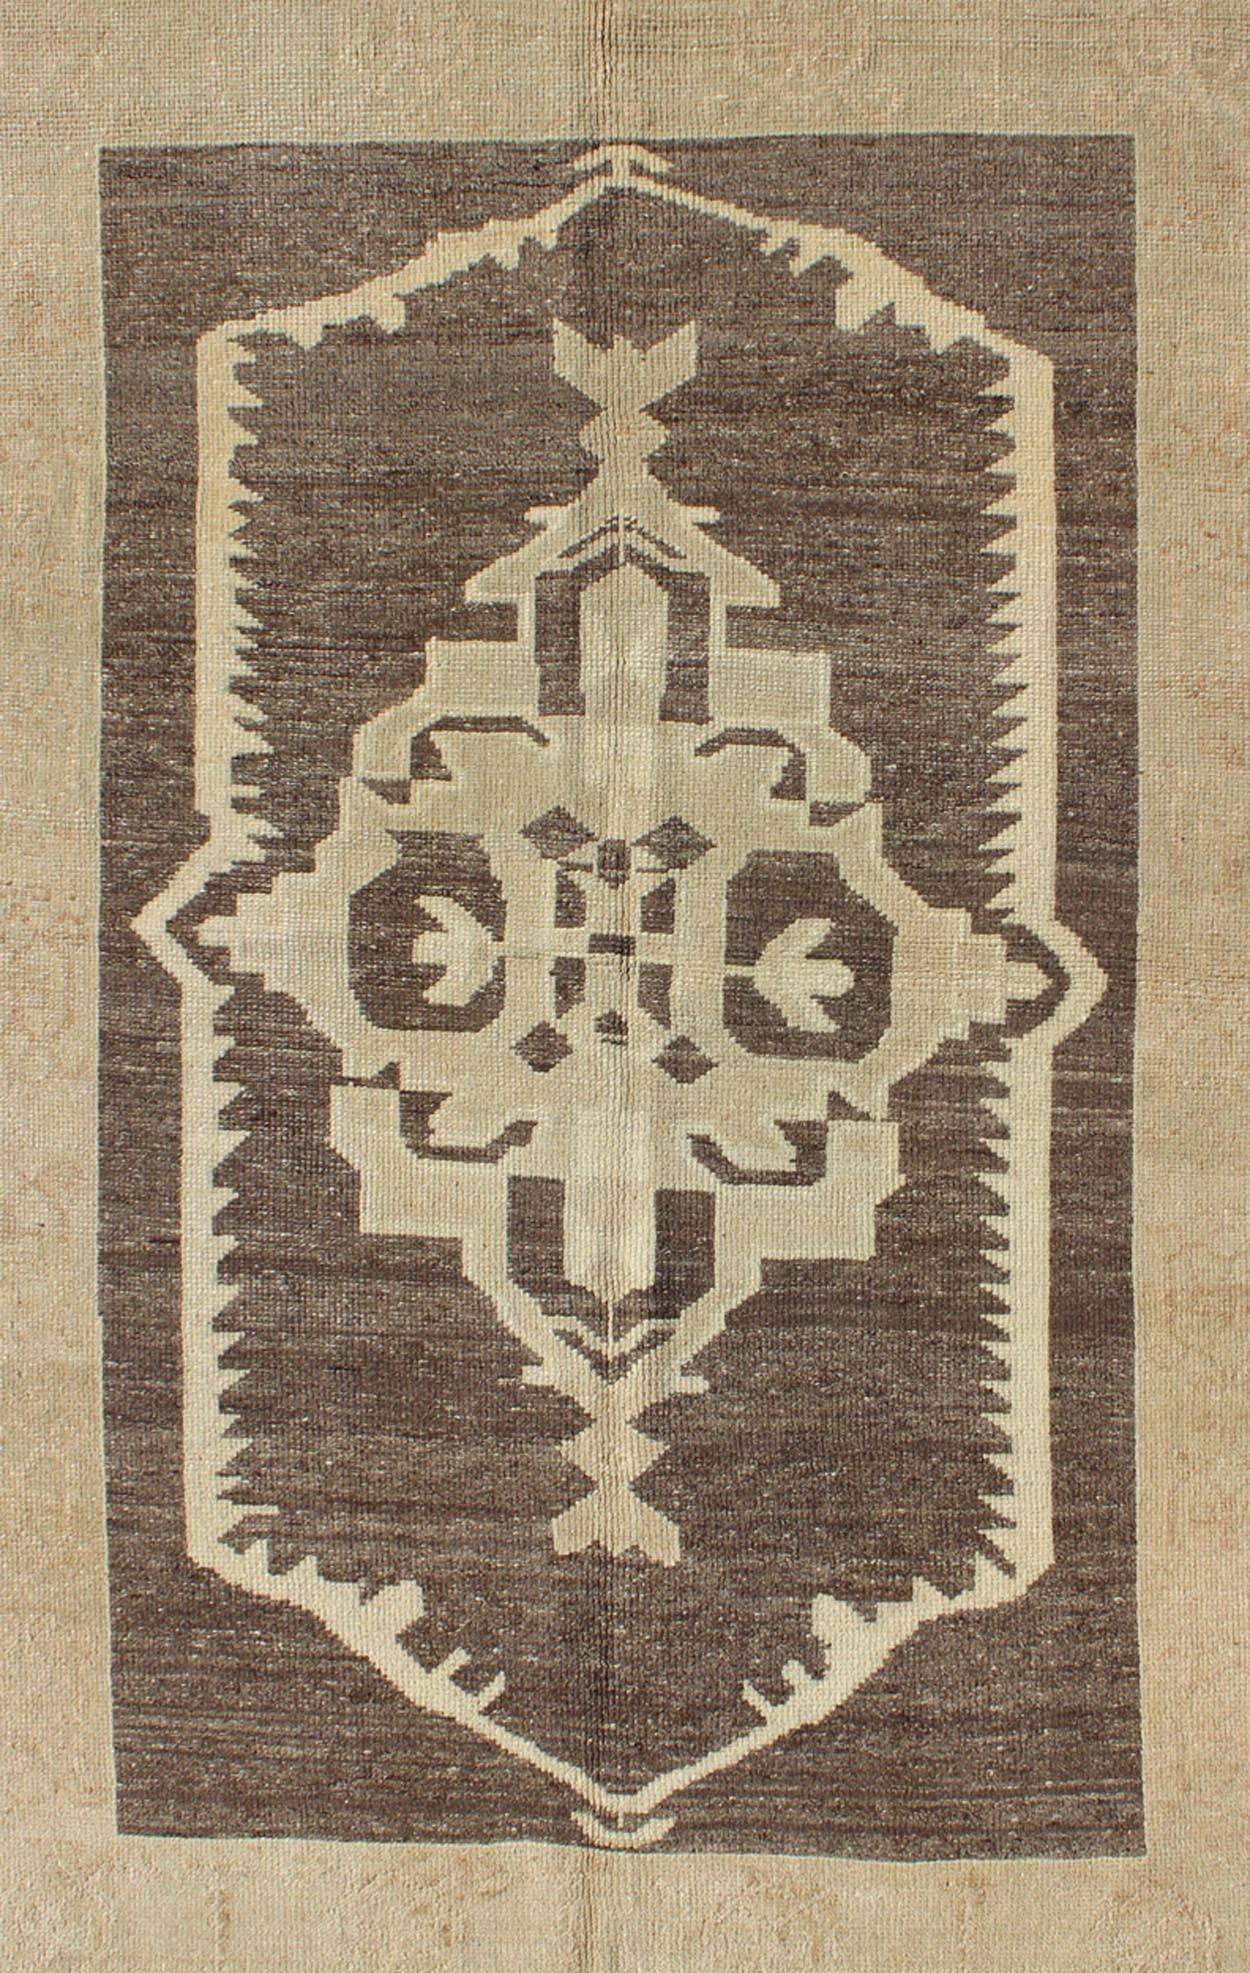 Hand-Knotted Vintage Turkish Oushak Rug with Central Medallions and Floral Borders in Brown